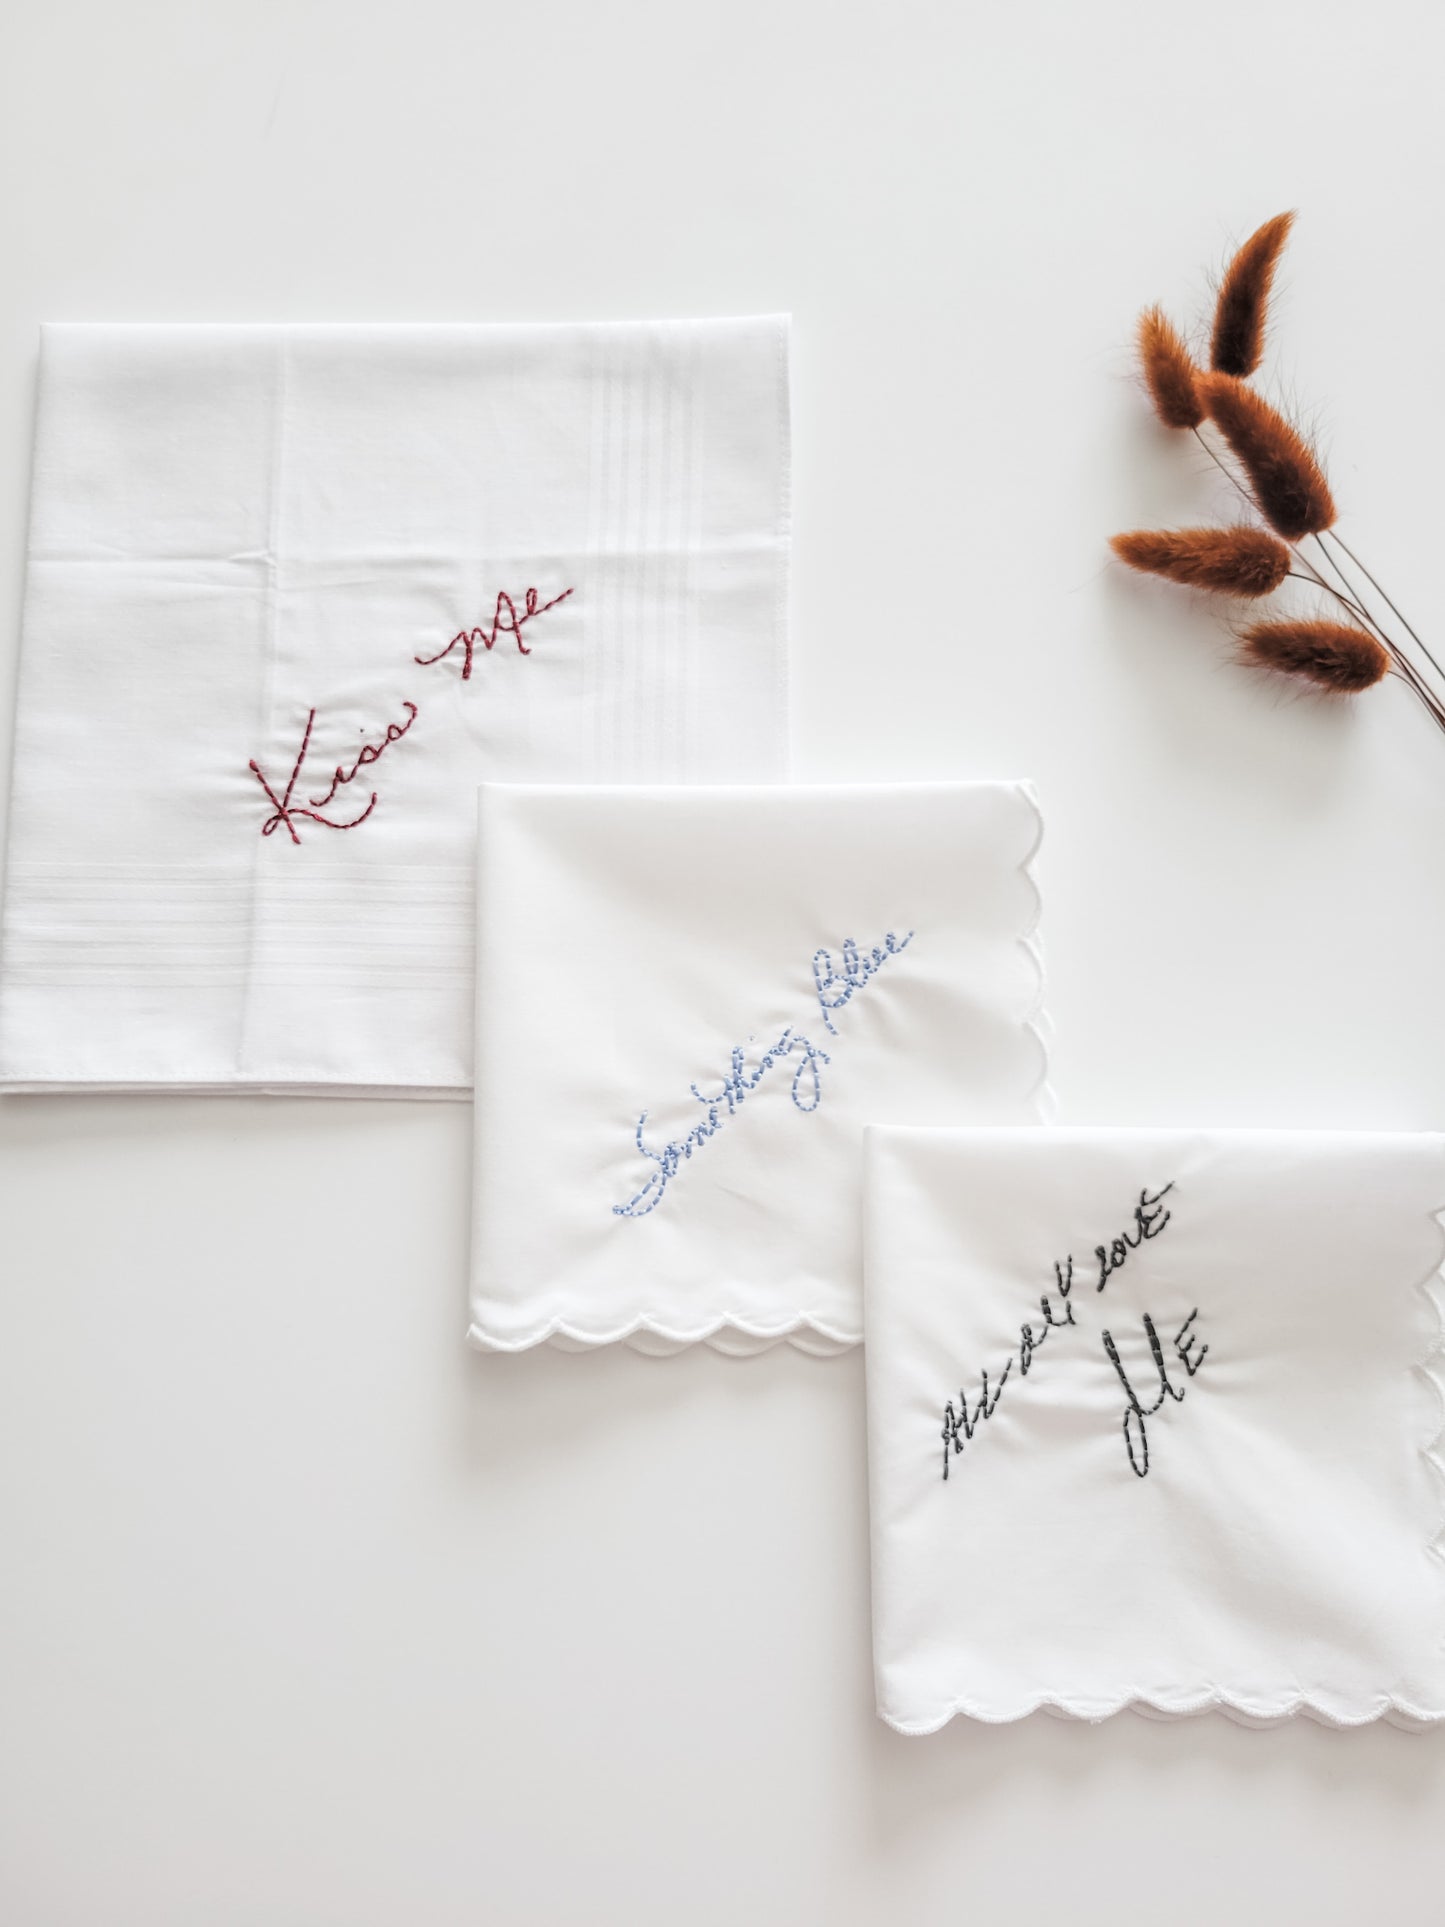 Your handwriting embroidered onto a handkerchief